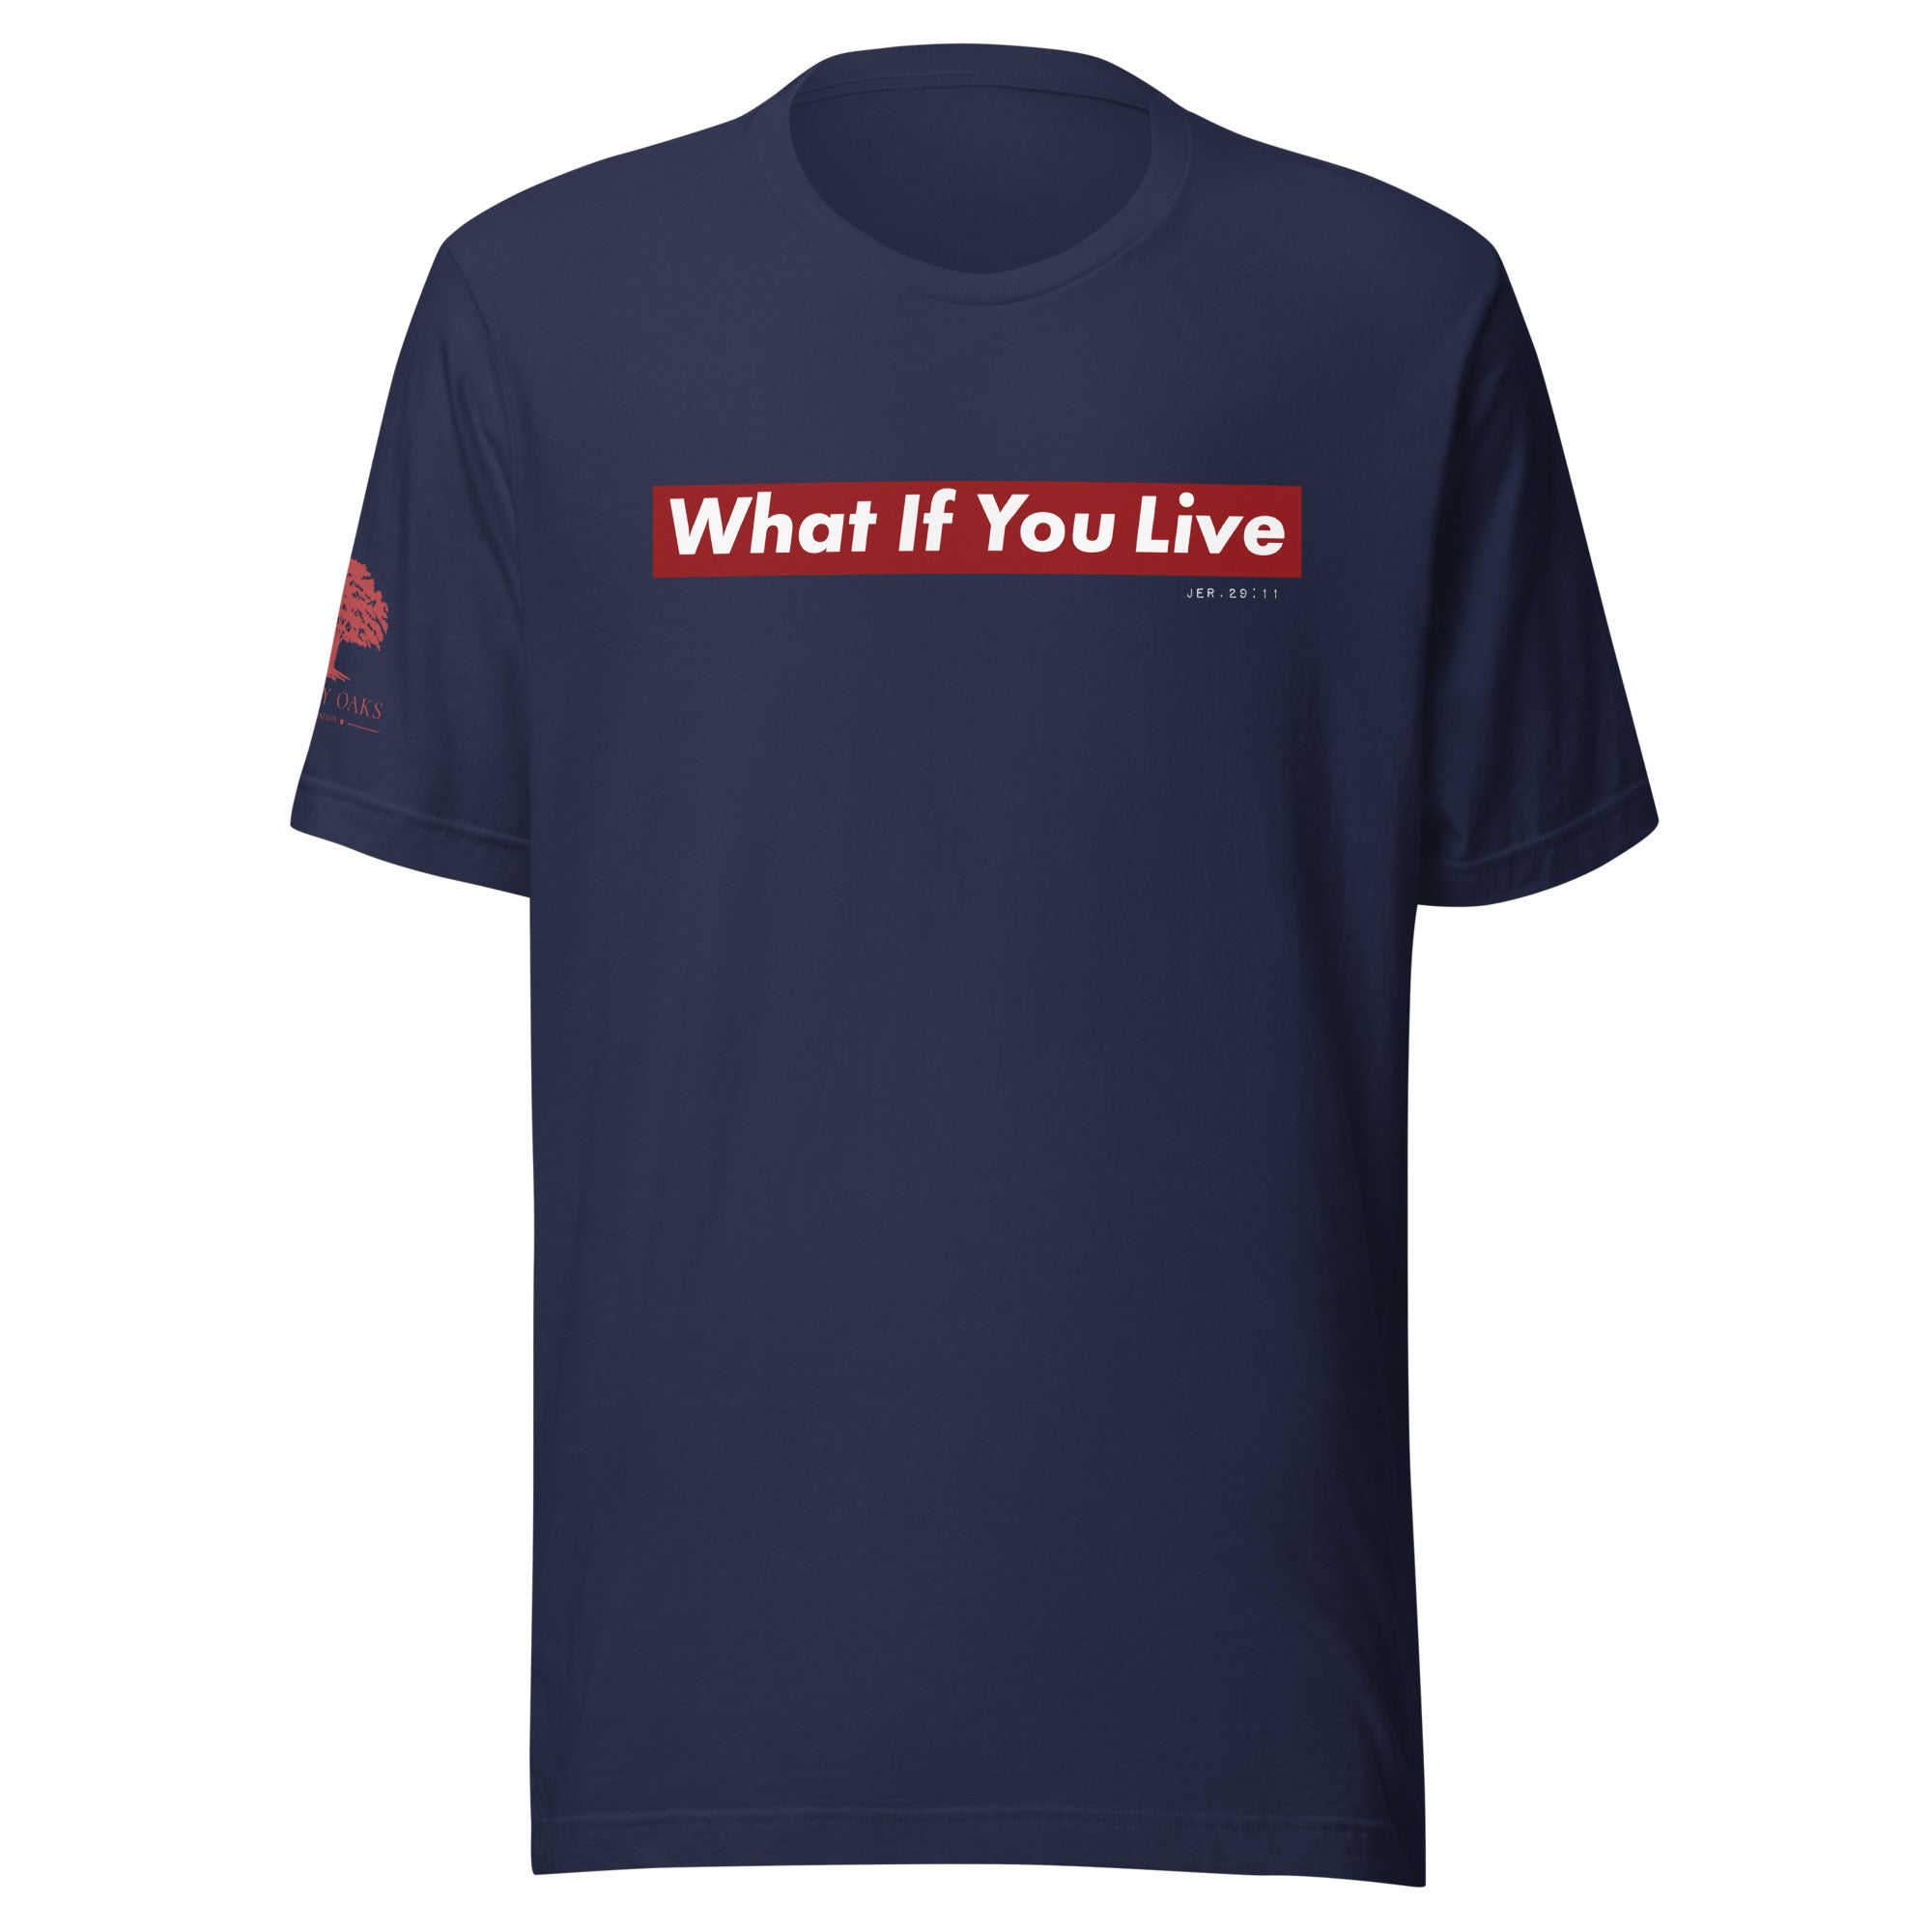 Slogan Unisex T-Shirt - "What If You Live"